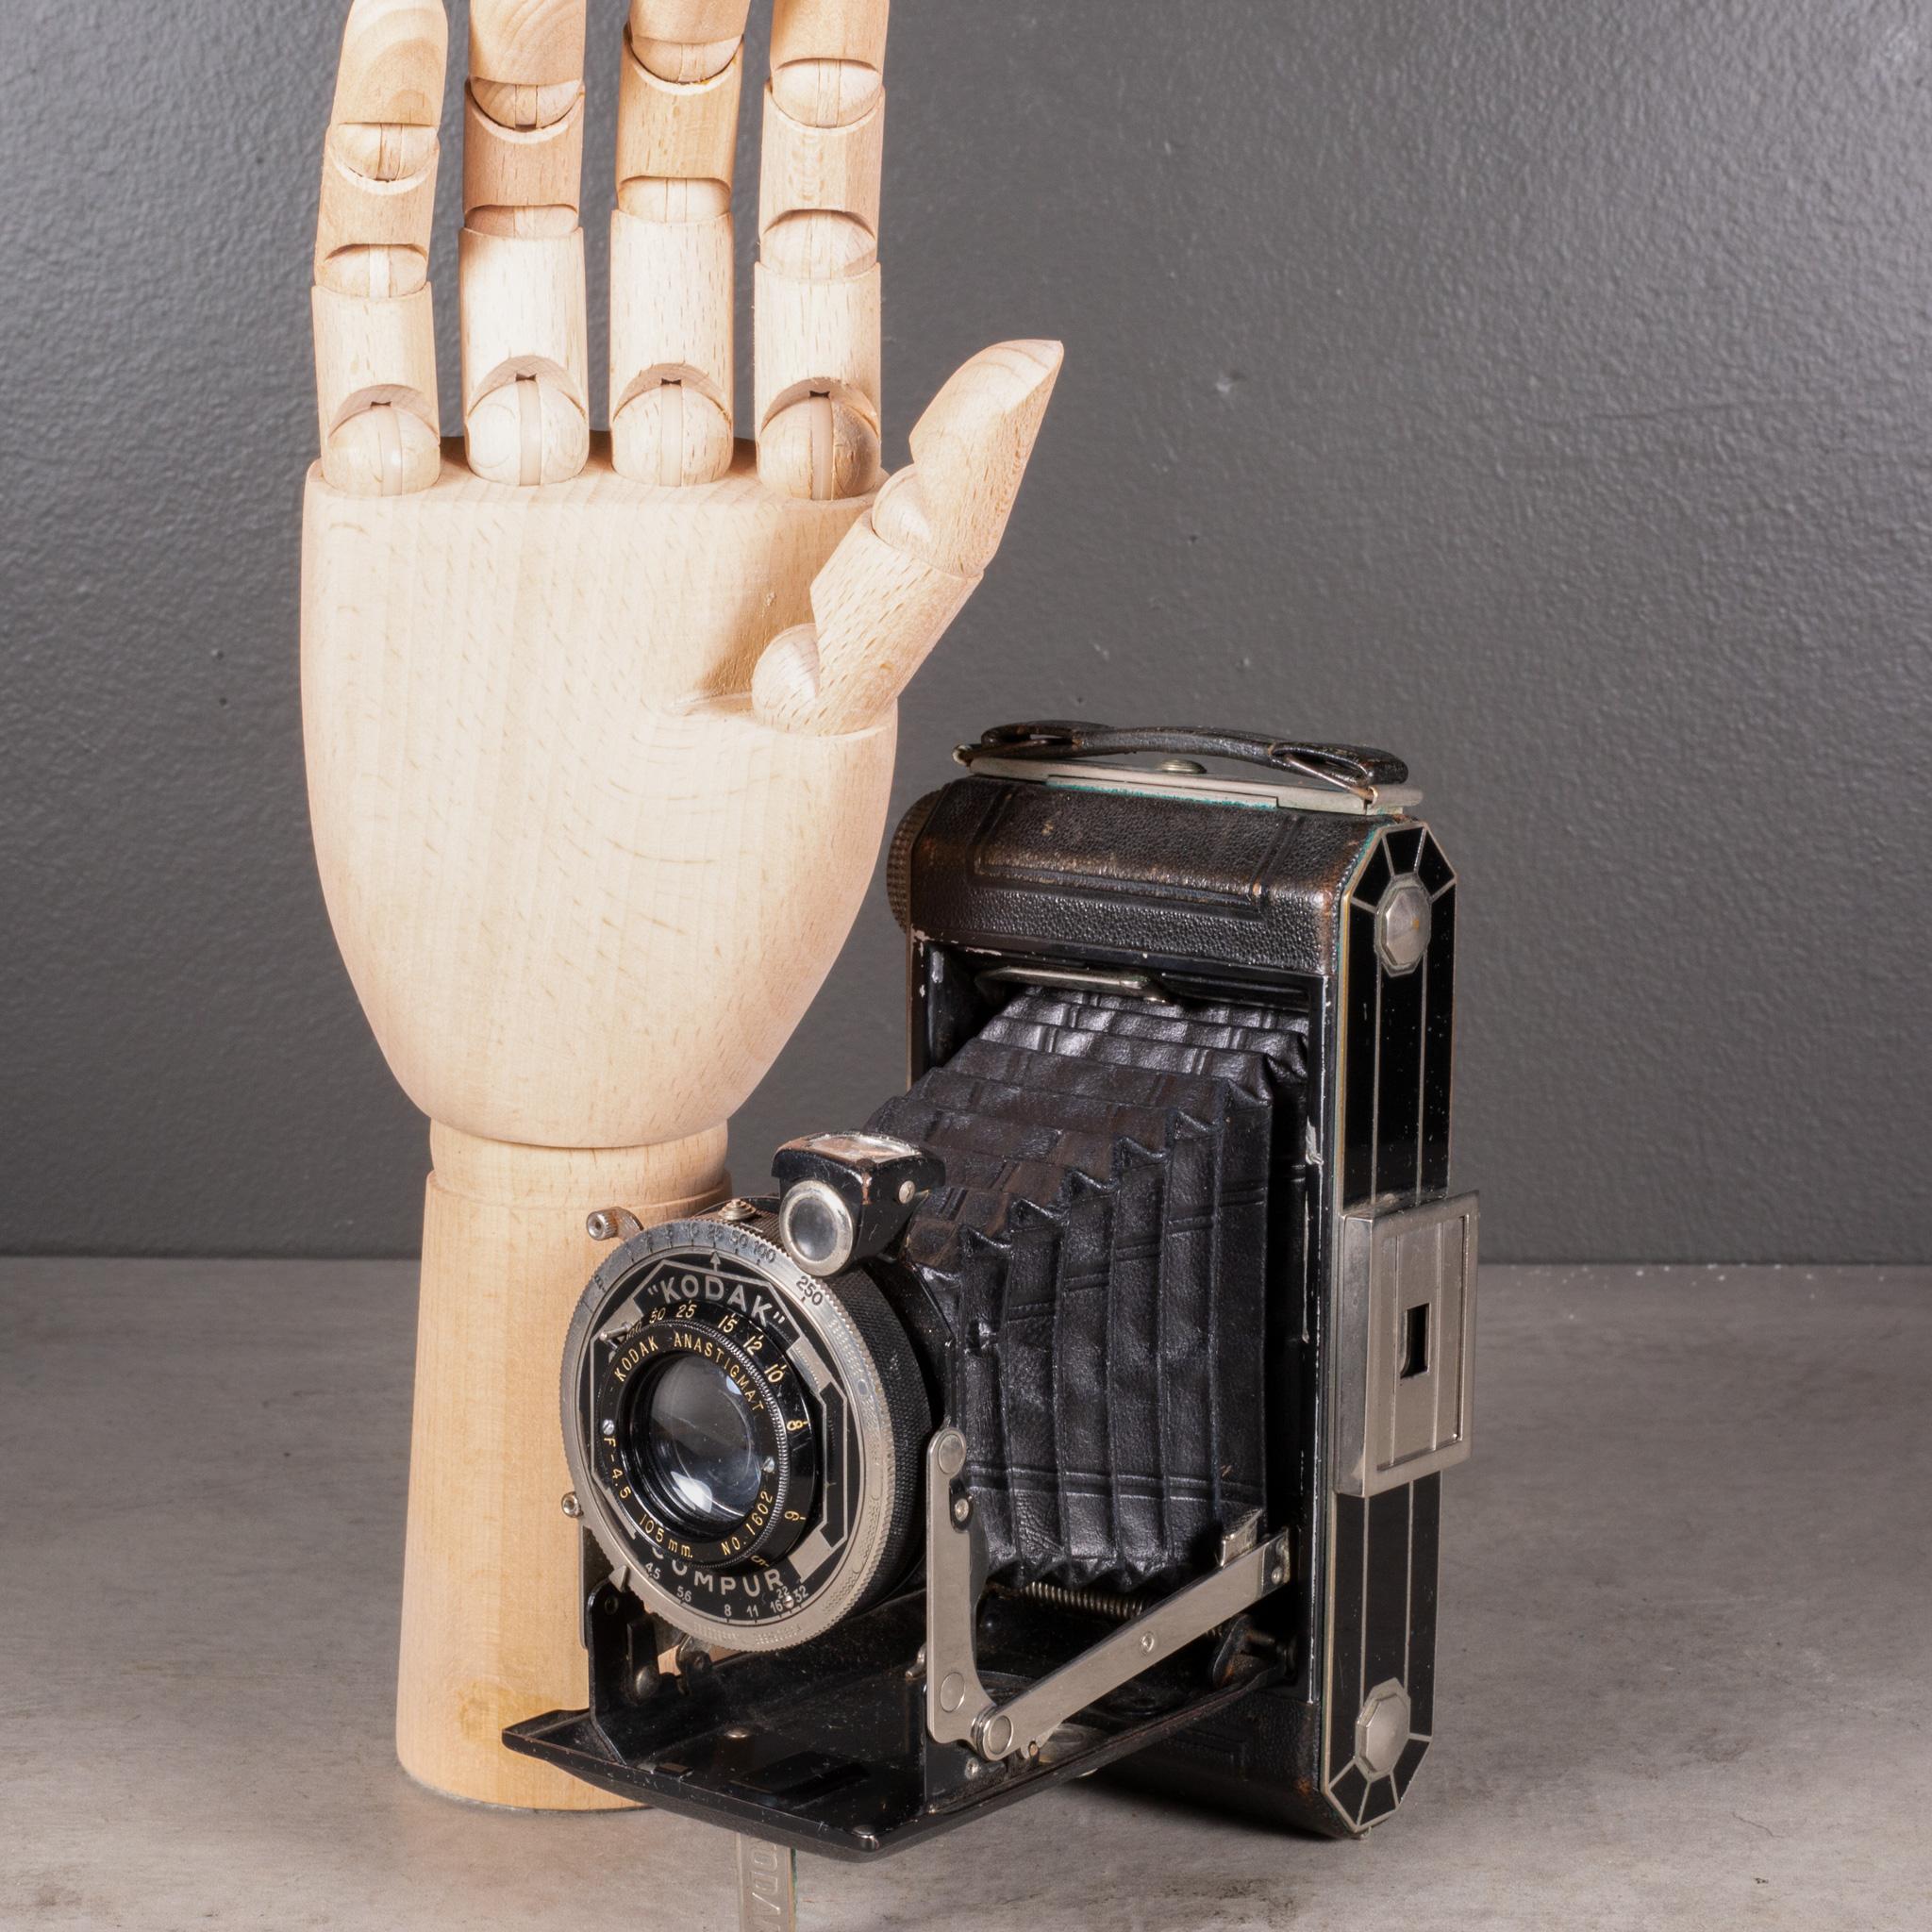 ABOUT

An Art Deco Kodak Compur Model Six-20 Folding Camera with a leather wrapped body, chrome accents and flip out view finder. Black and silver Art Deco design on both sides

Shown with life size hand.

    CREATOR Eastman Kodak Co.
    DATE OF